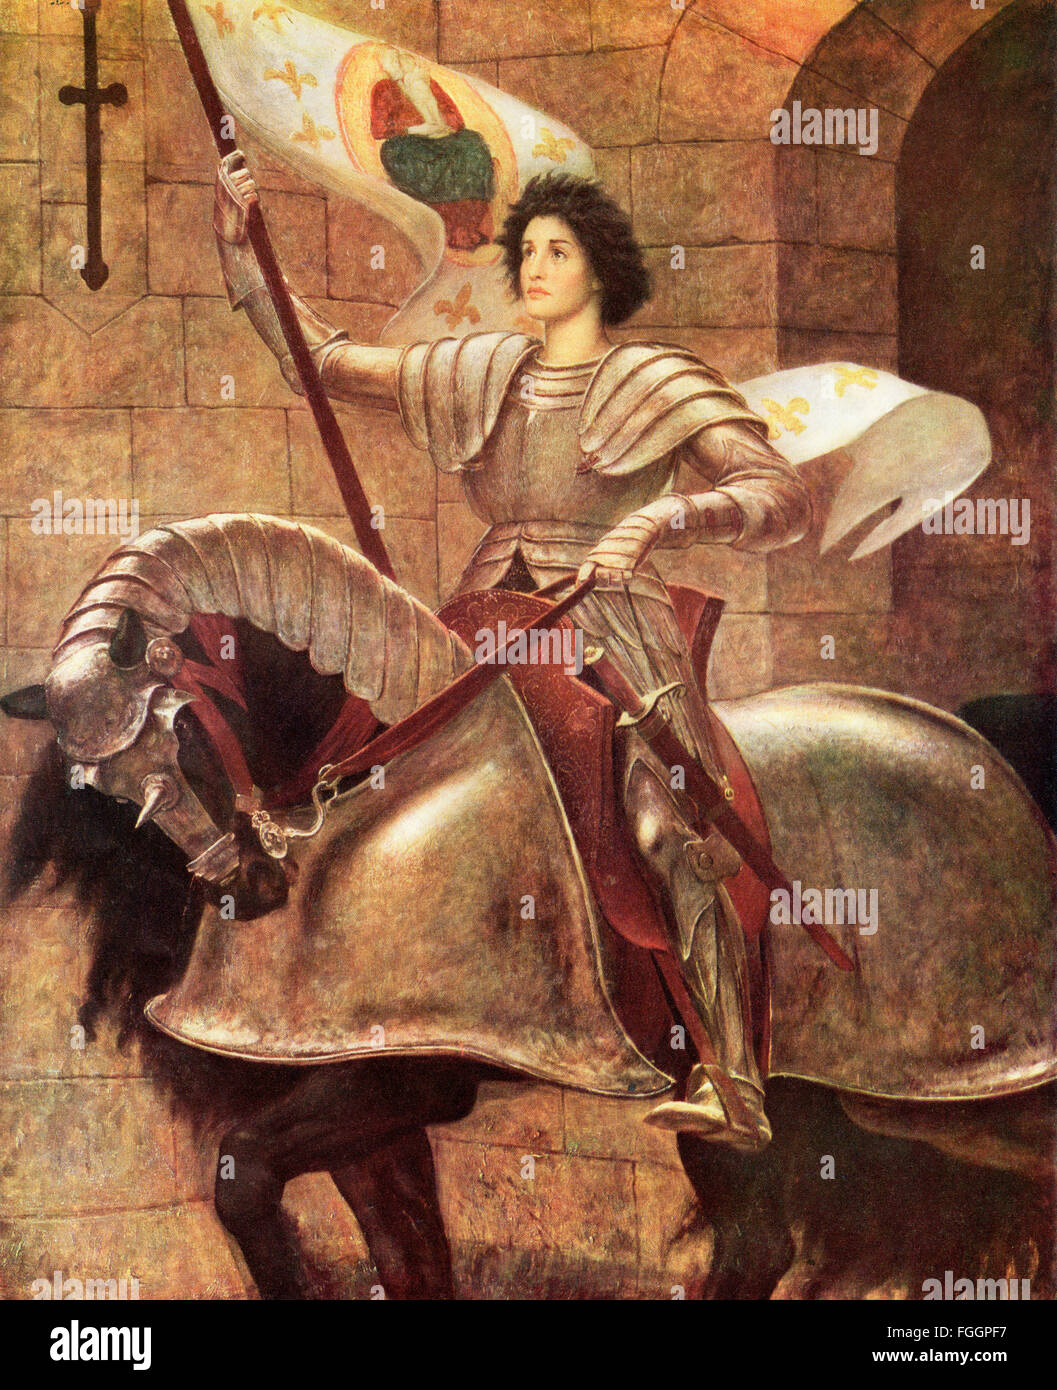 Joan of Arc, 1412 - 1431, aka Jeanne d'Arc, The Maid of Orléans  or Jeanne la Pucelle.  French heroine.  After the painting by W. B. Richmond. Stock Photo